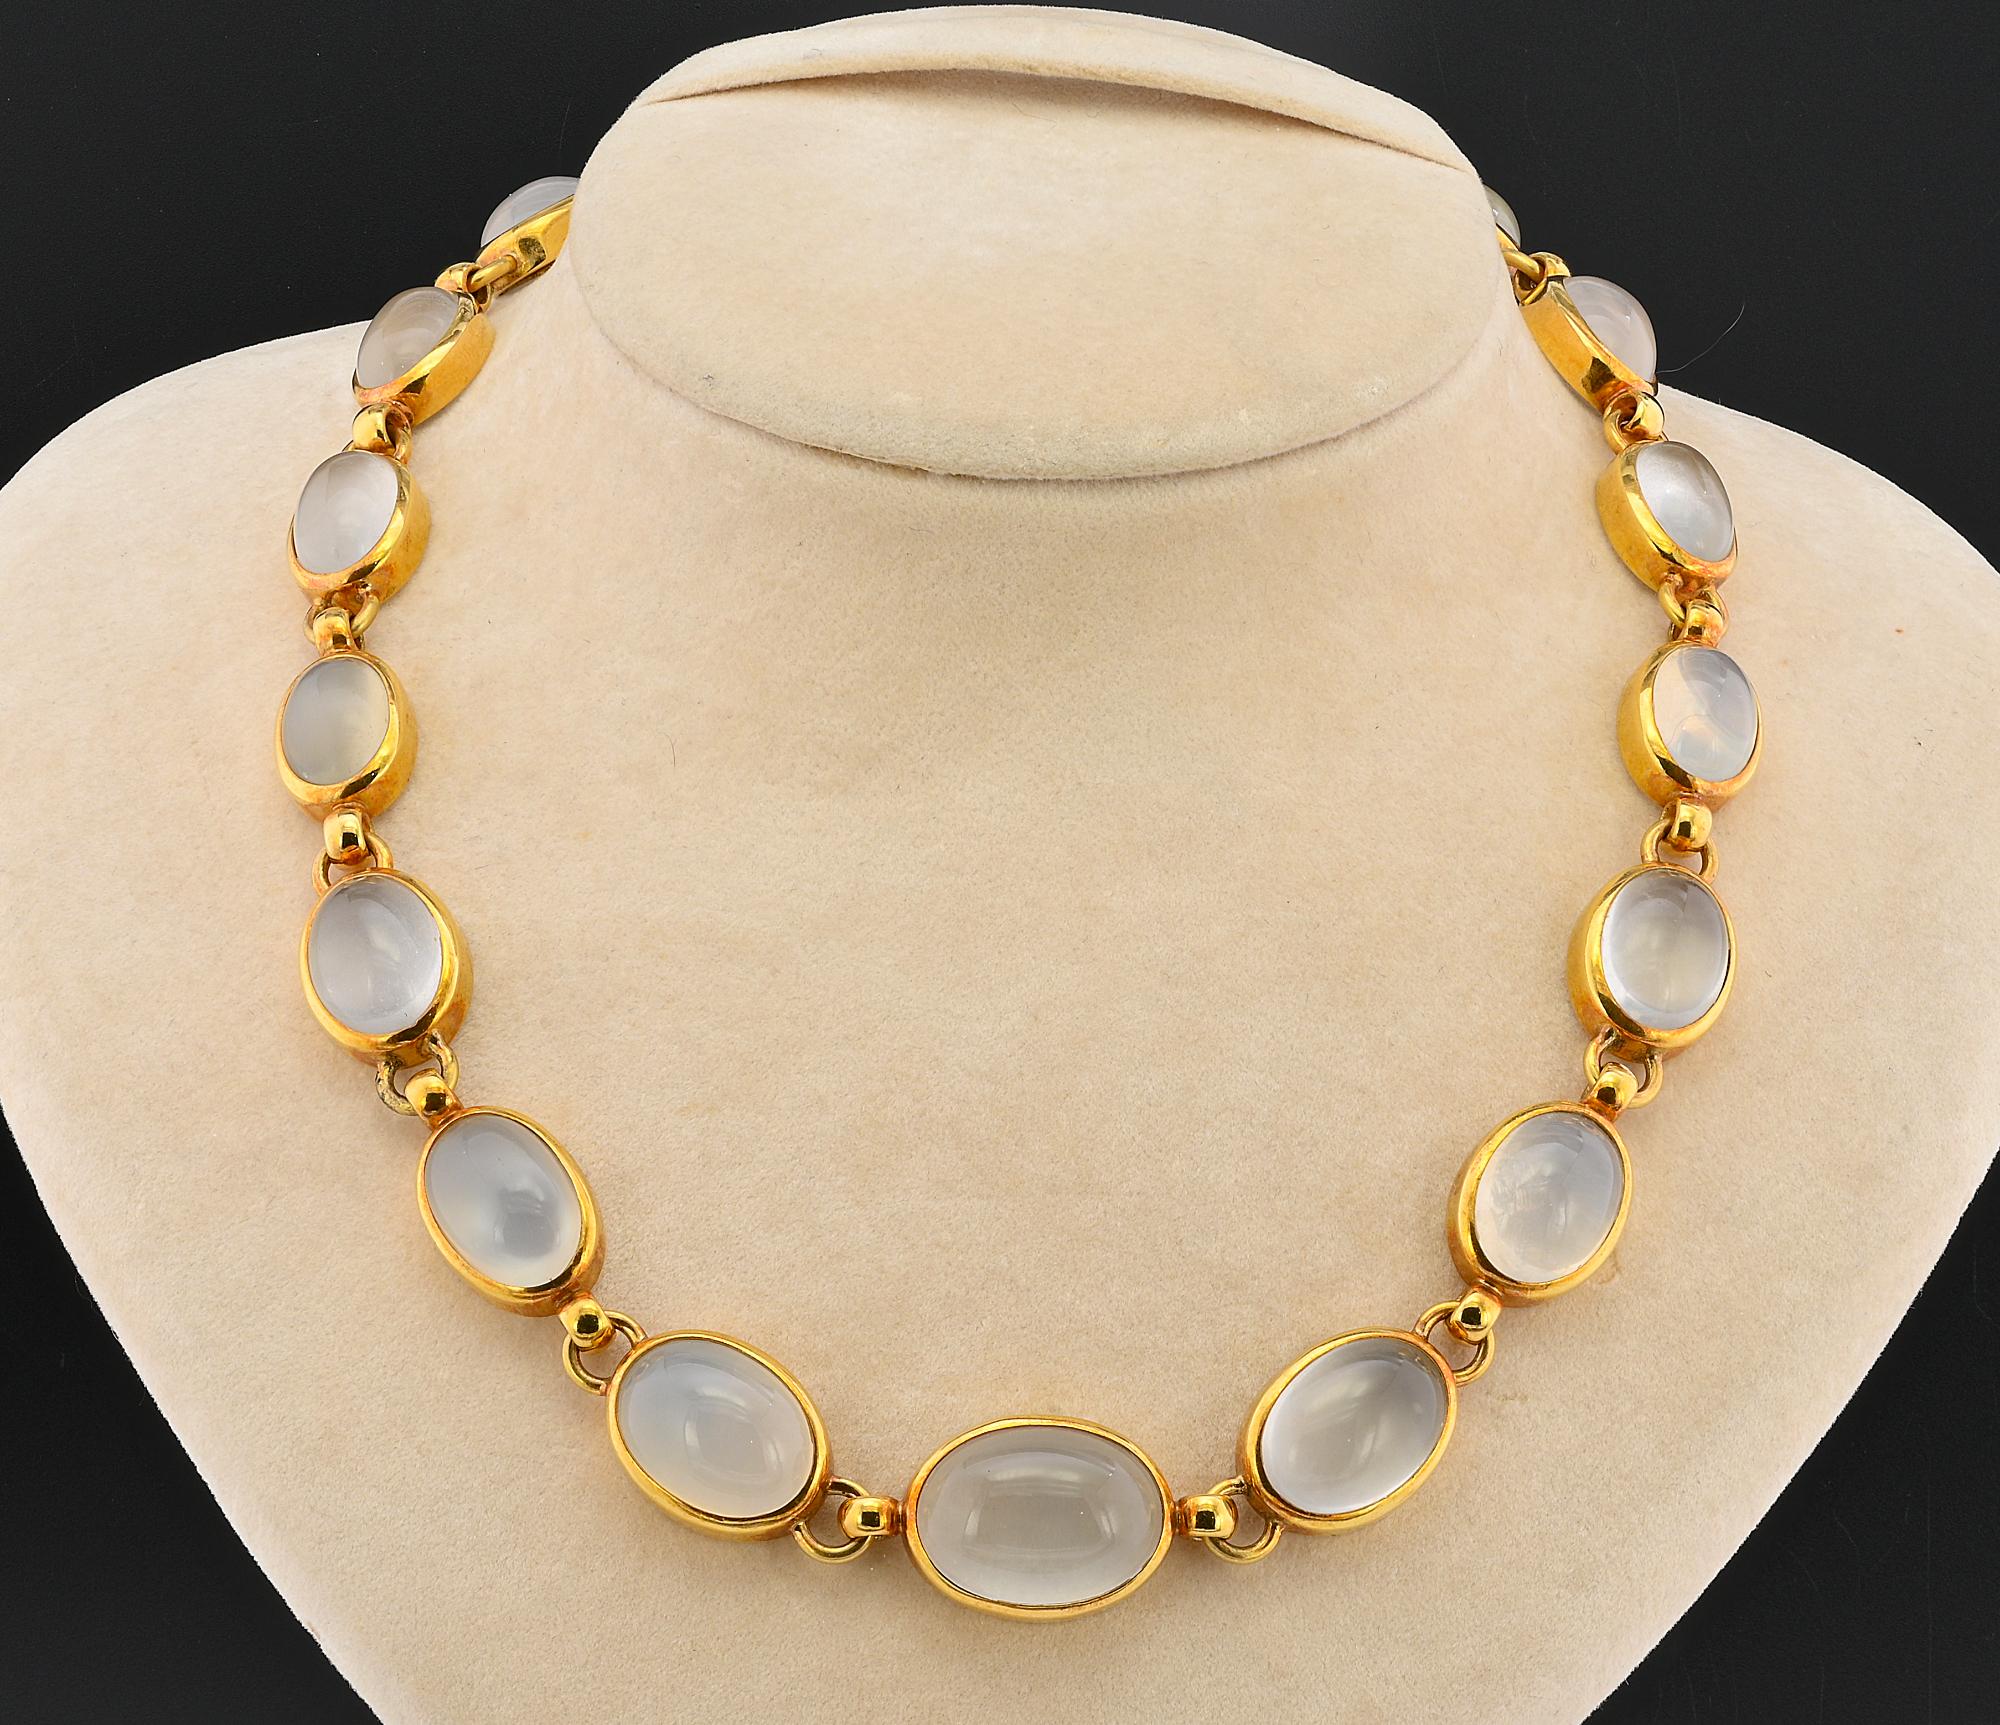 Spectacular Retro necklace dating 1940 circa – Italian origin
Consisting in a graduated selection of natural Moonstones set in 18 KT gold rub mount and linked each other, hand crafted in the finest manner
Necklace gross weight is 92,4